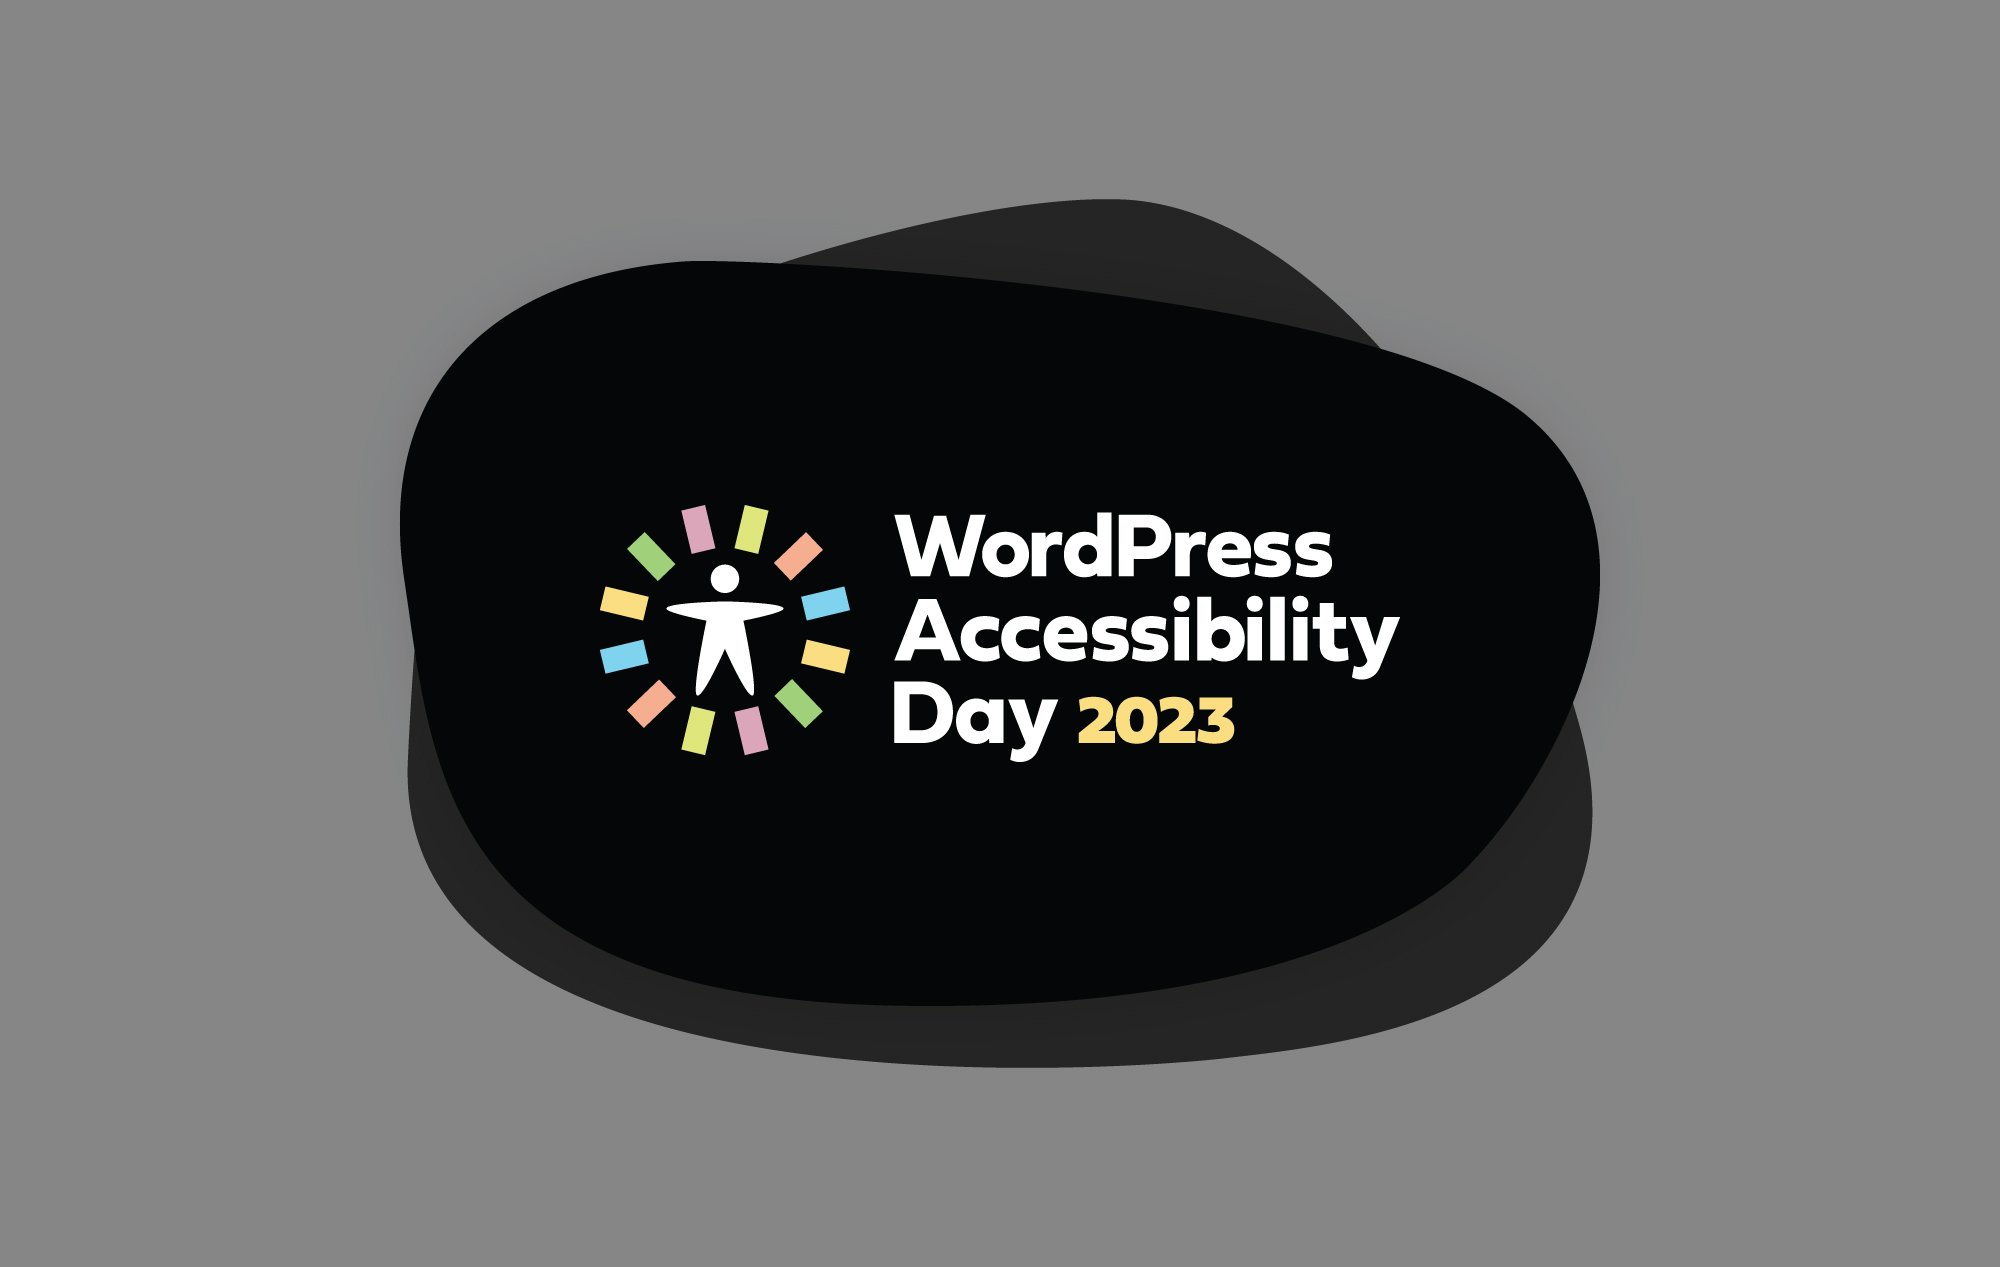 The WordPress Accessibility Day 2023 logo over a black and gray background.